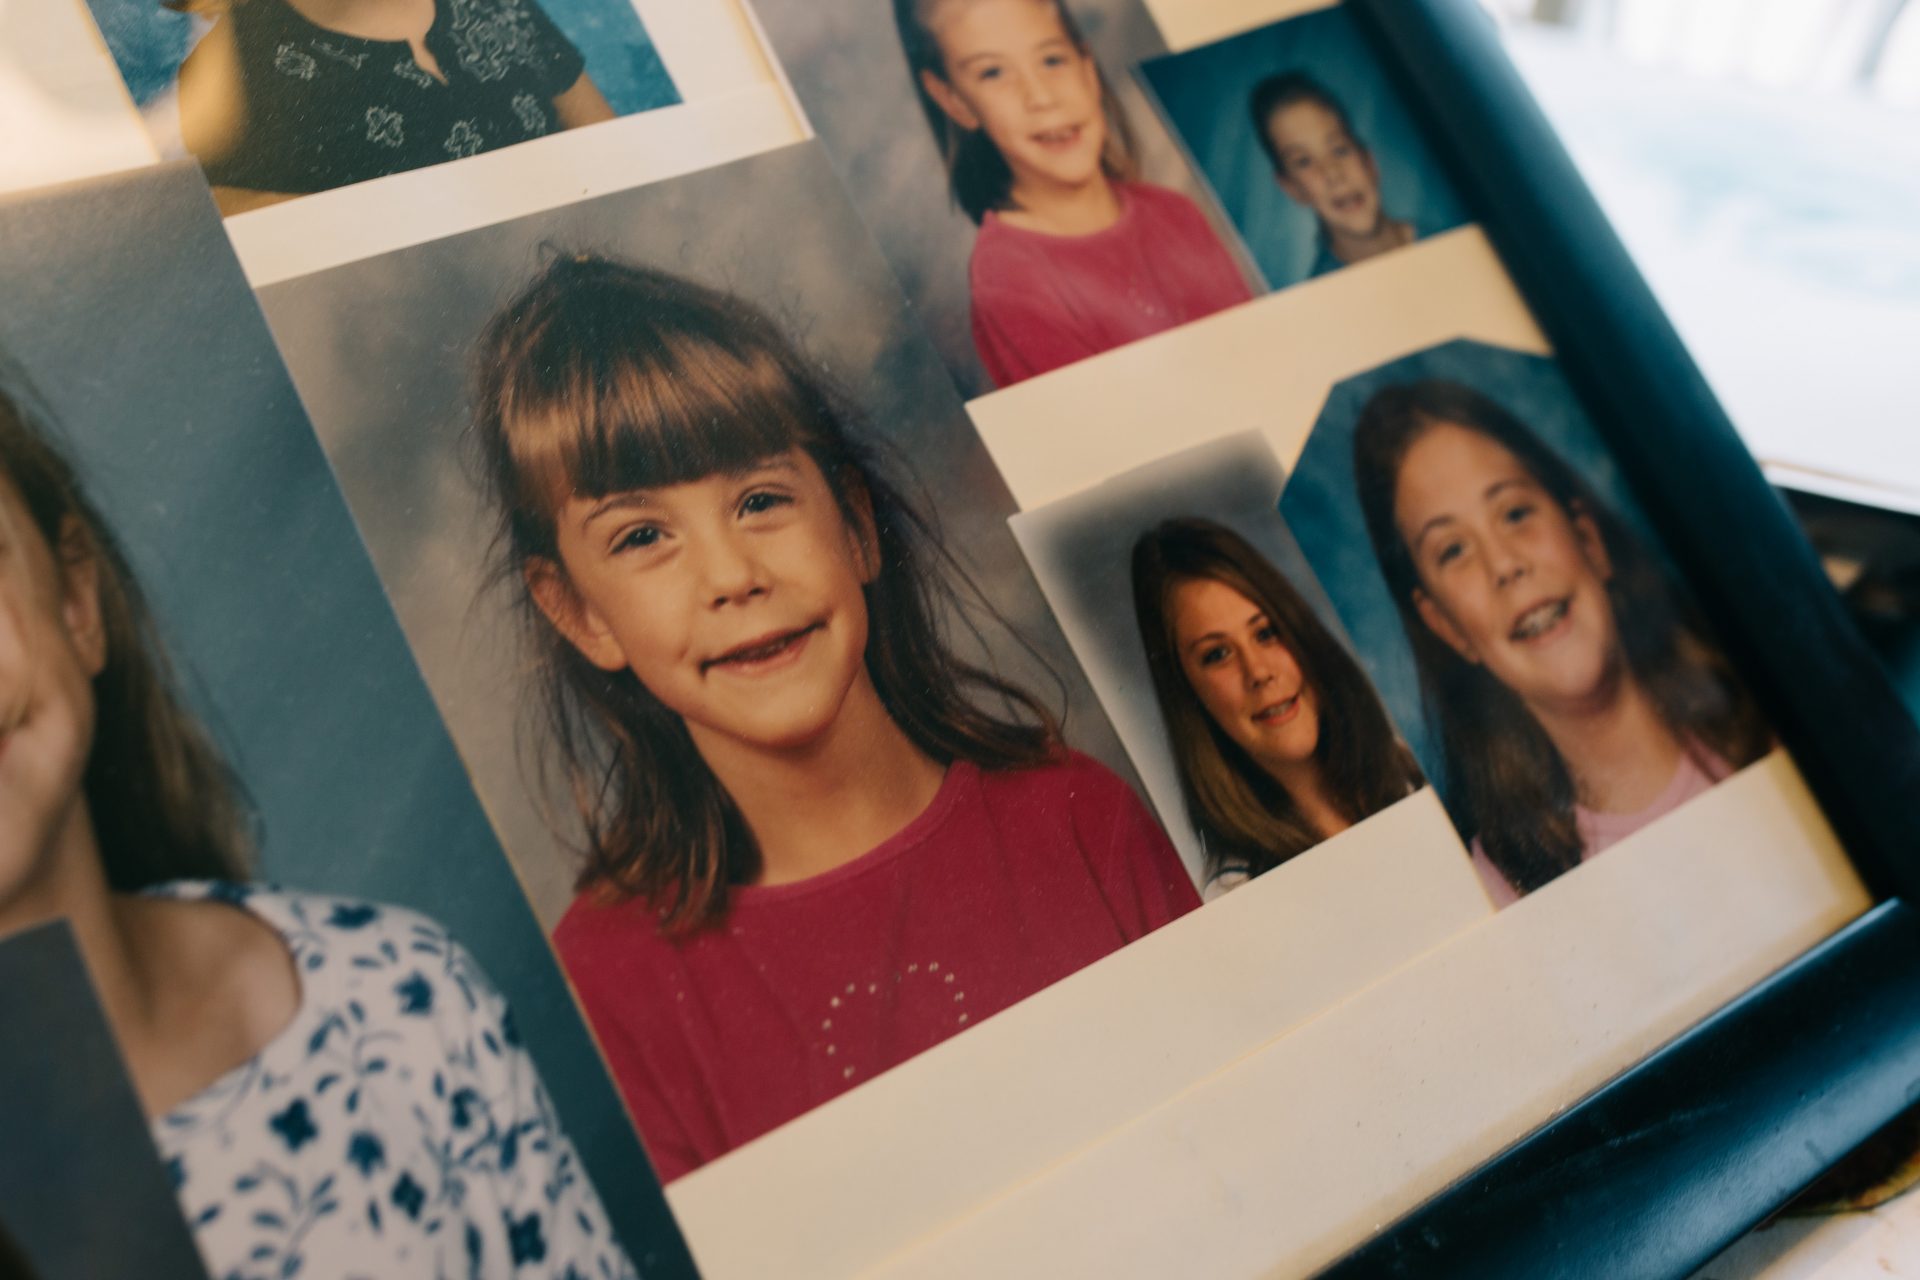 Photos of Kimberly Stringer throughout her childhood are displayed in the Stringer family's home in Morrisville, Pa., on Aug. 7, 2020.